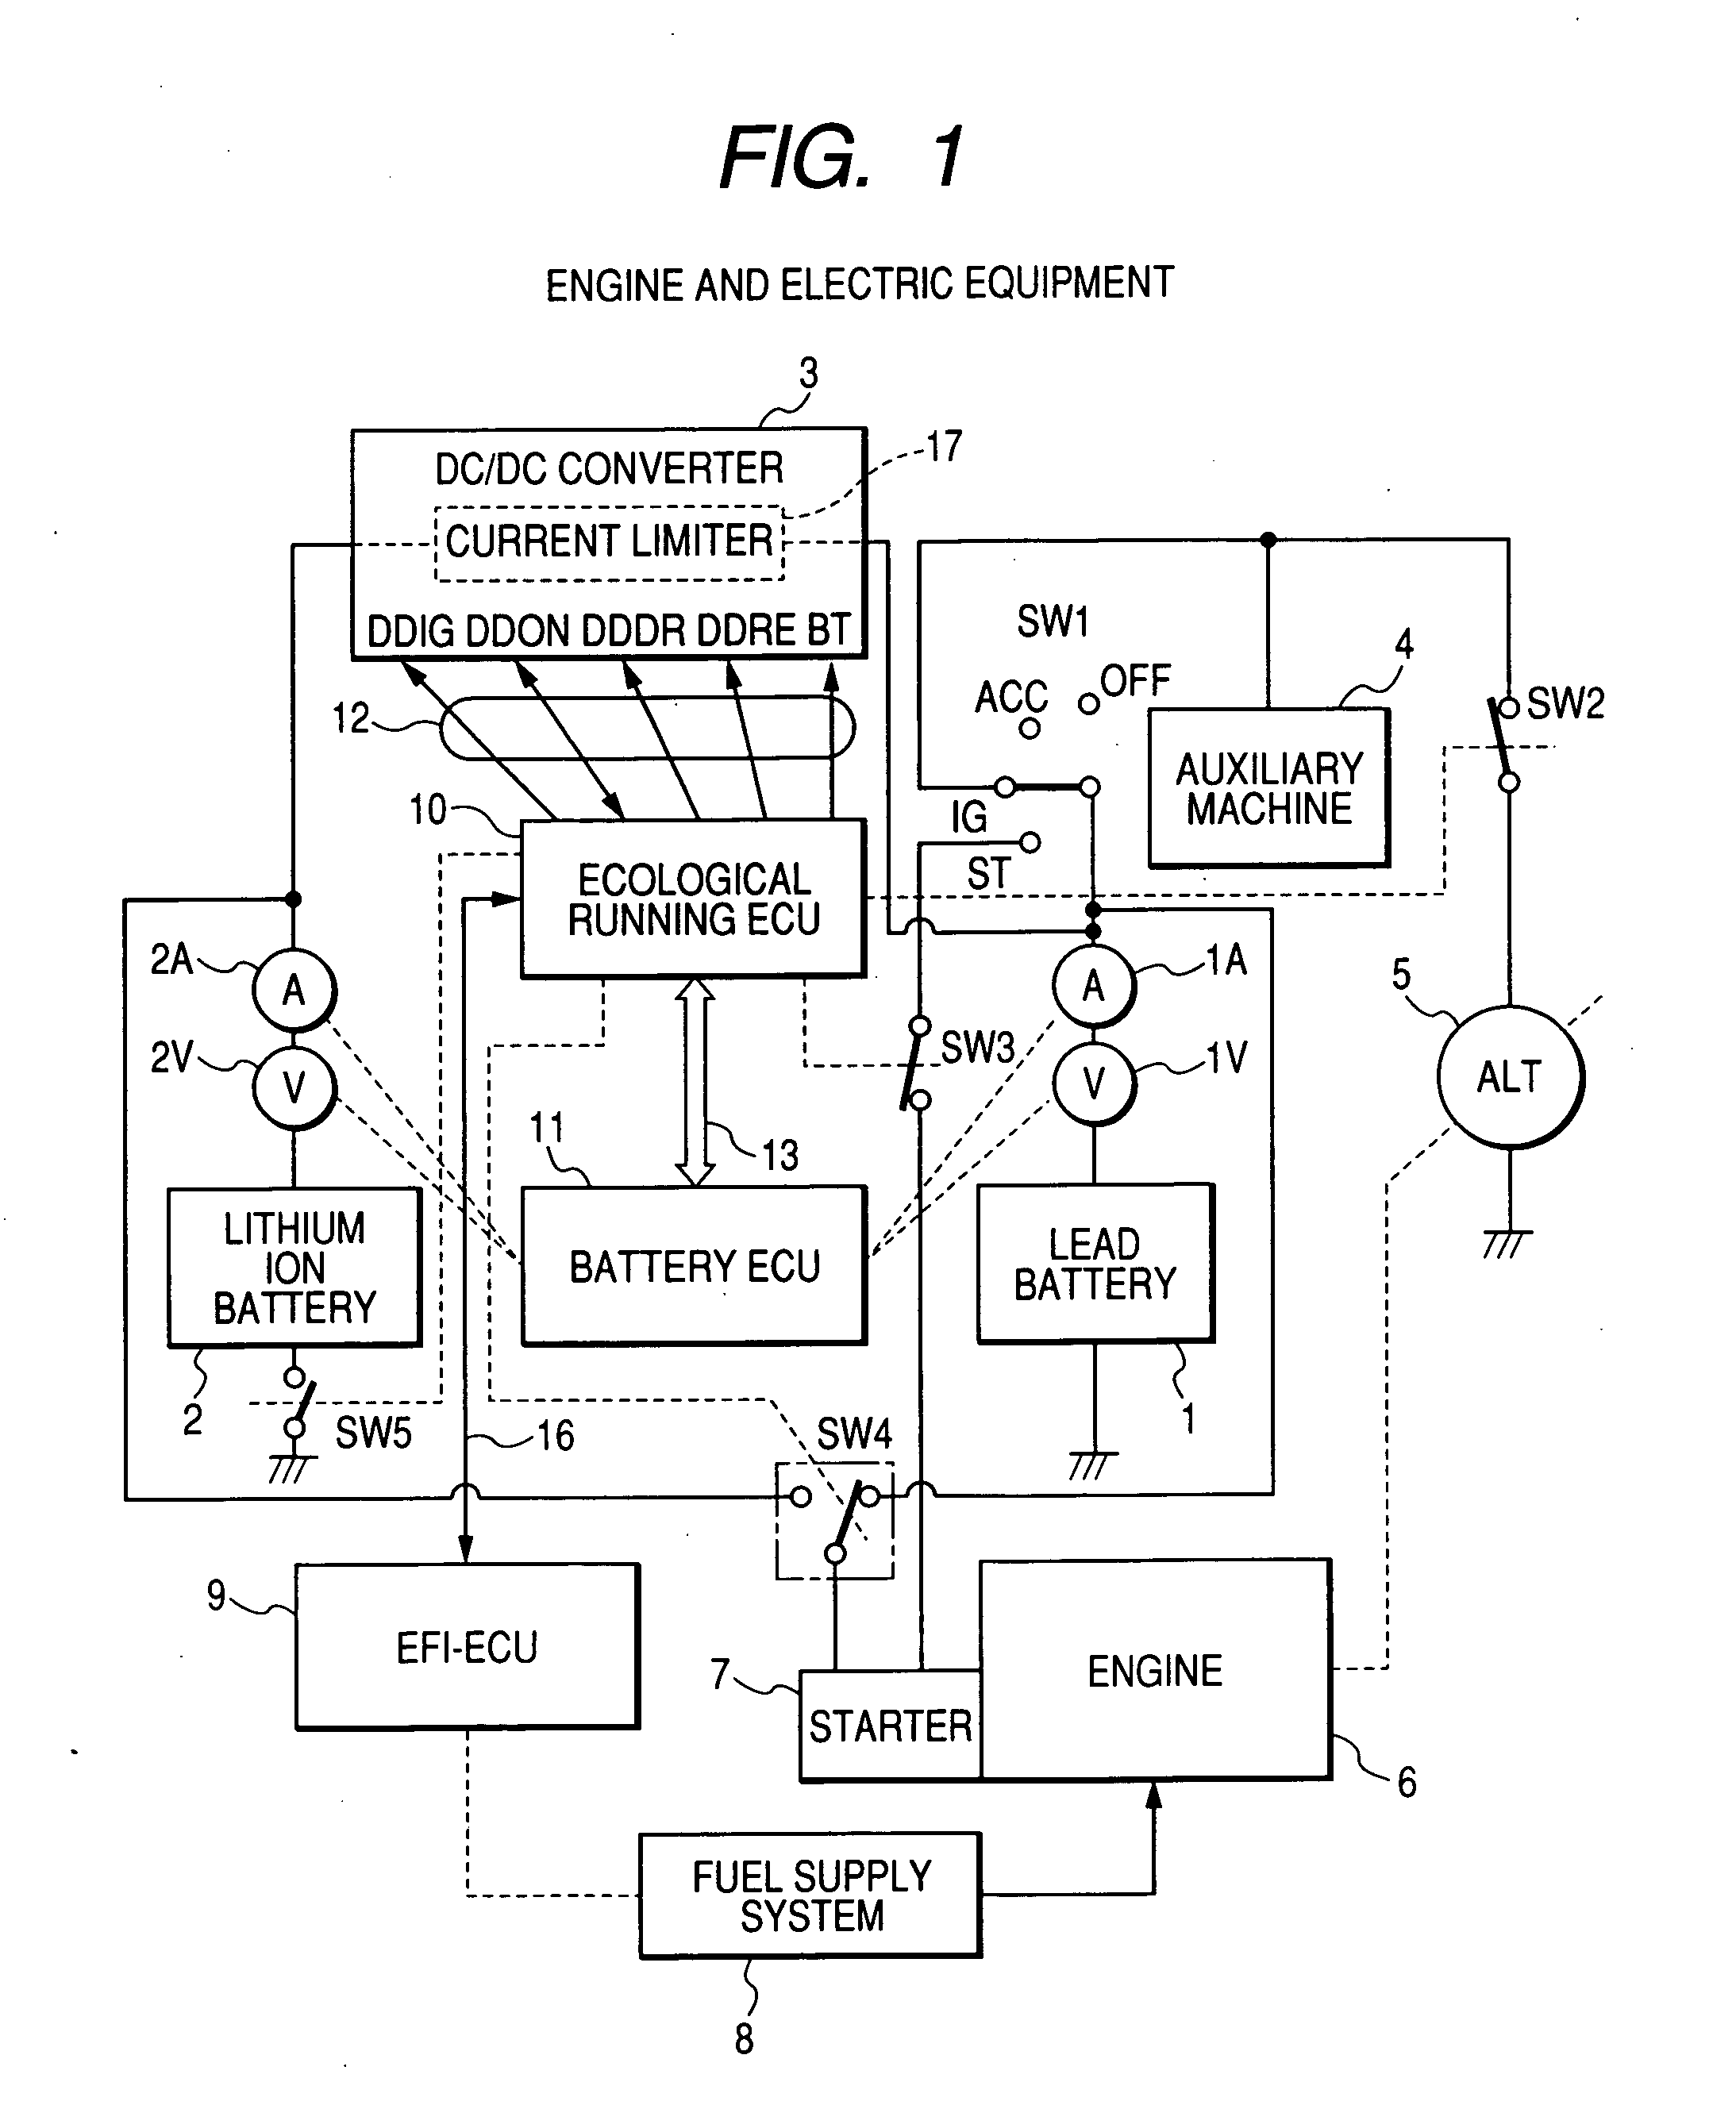 Engine control apparatus, control method and control system